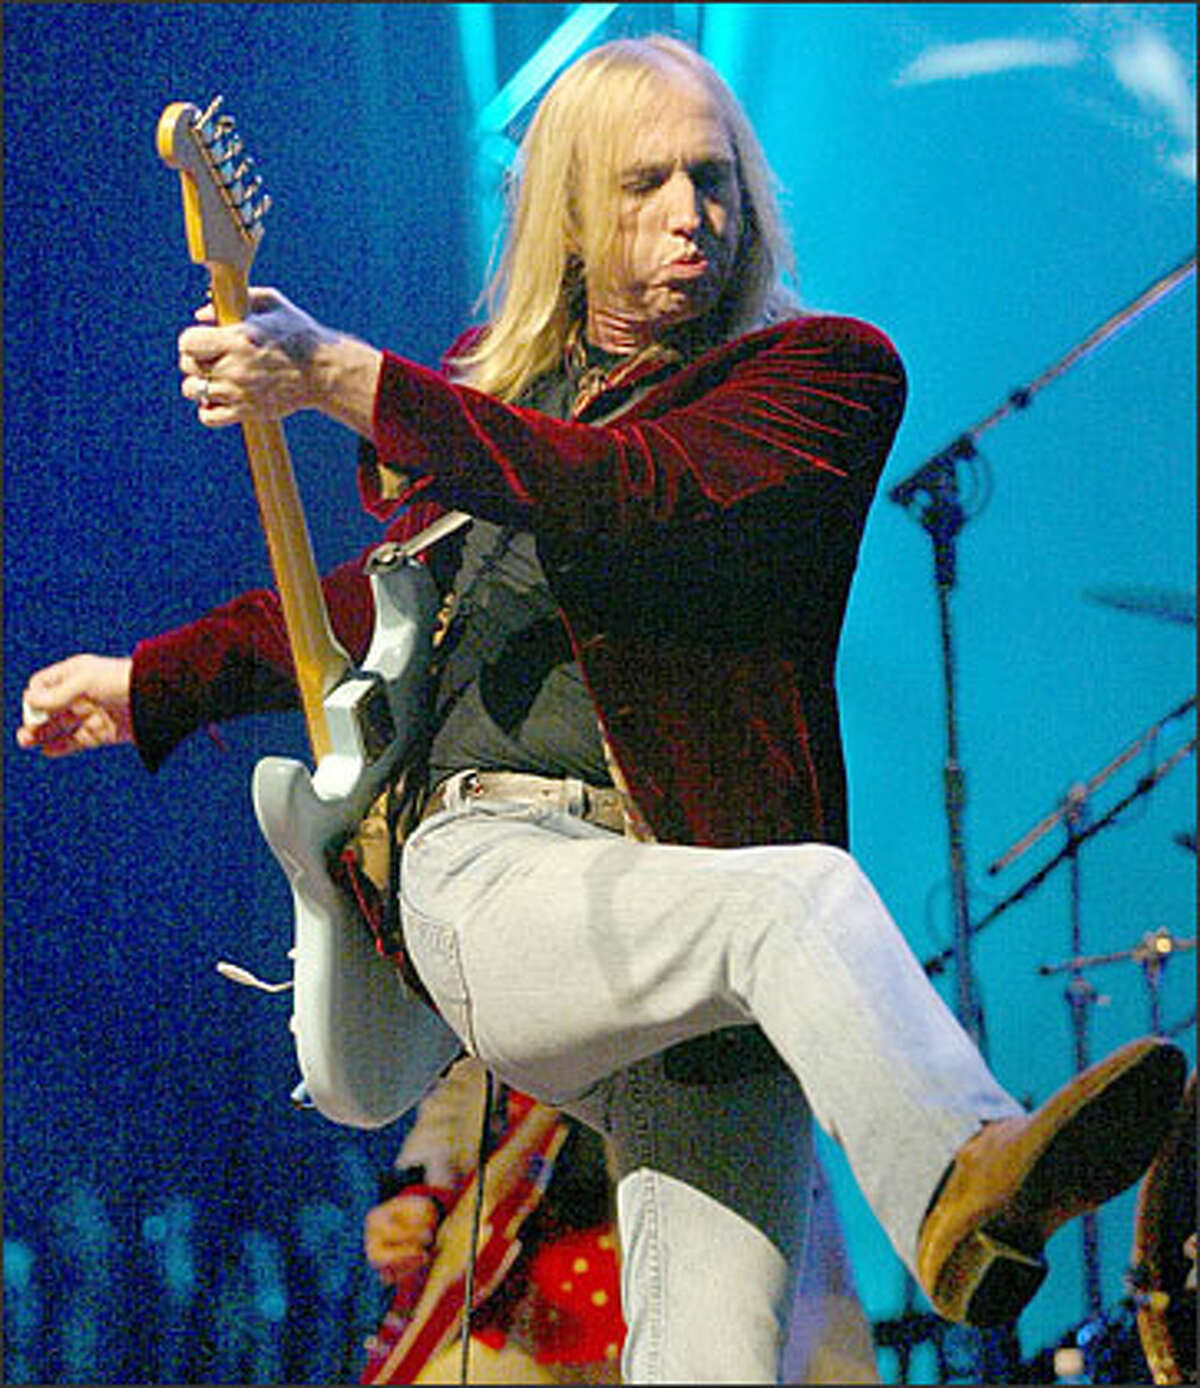 Tom Petty and the Heartbreakers perform at the Tacoma Dome Saturday night as part of the "Last DJ Tour" concert.